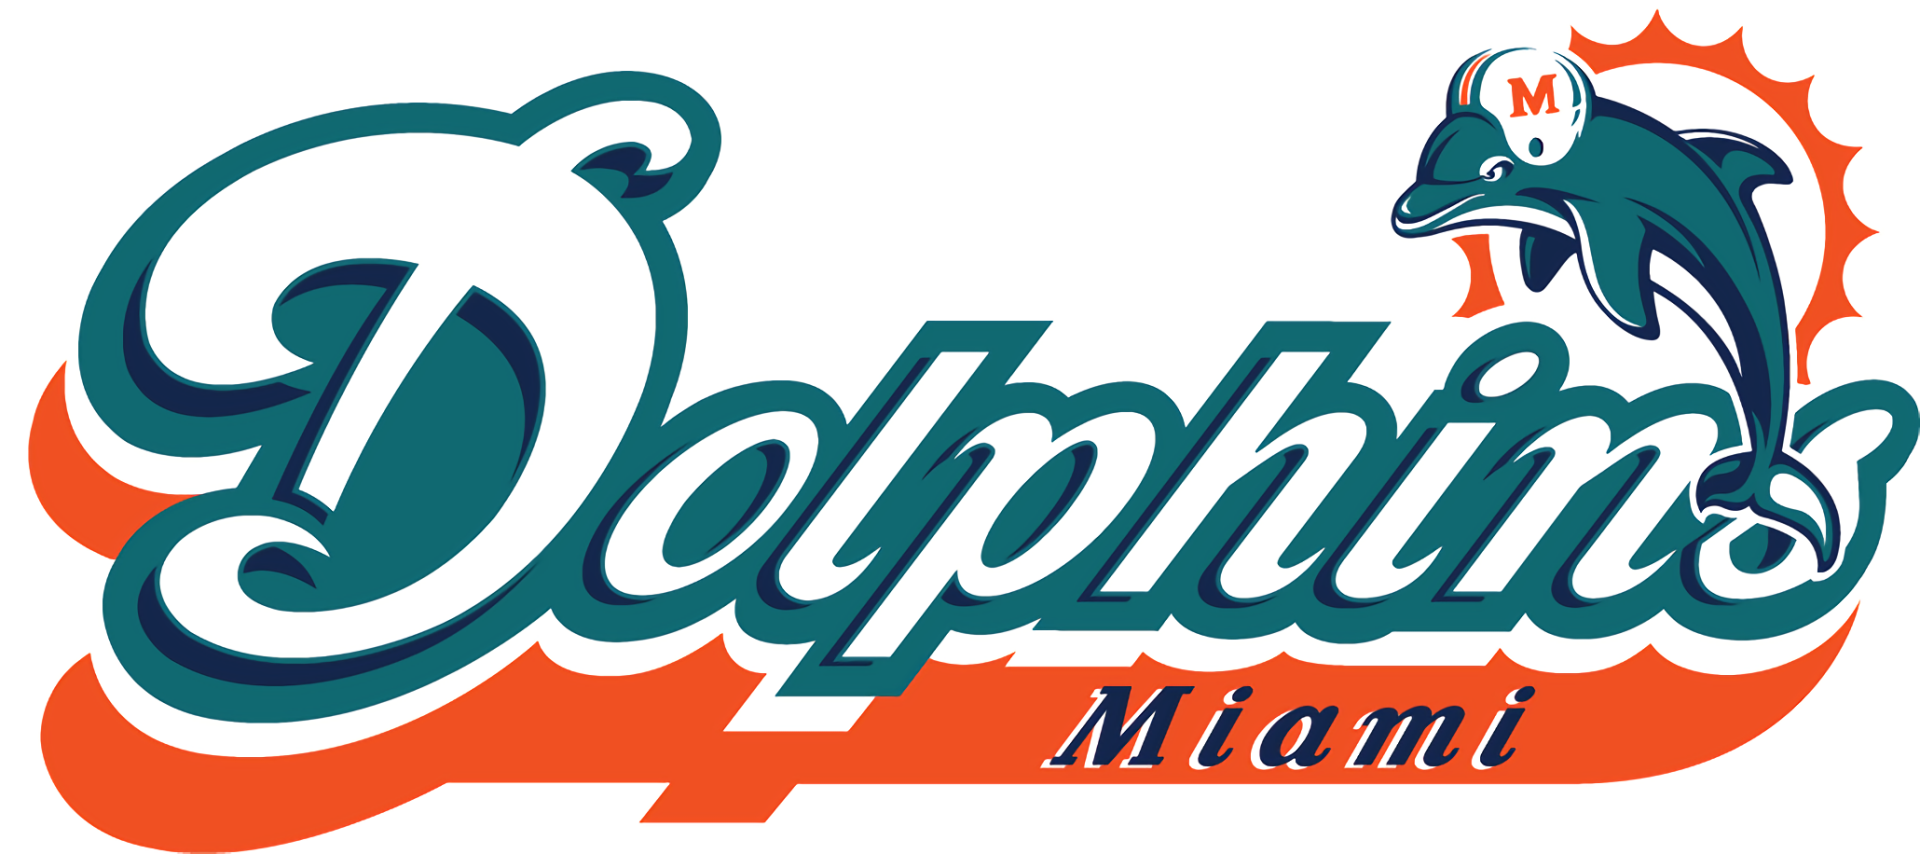 Miami Dolphins Wallpaper and Background Image 2060x916.